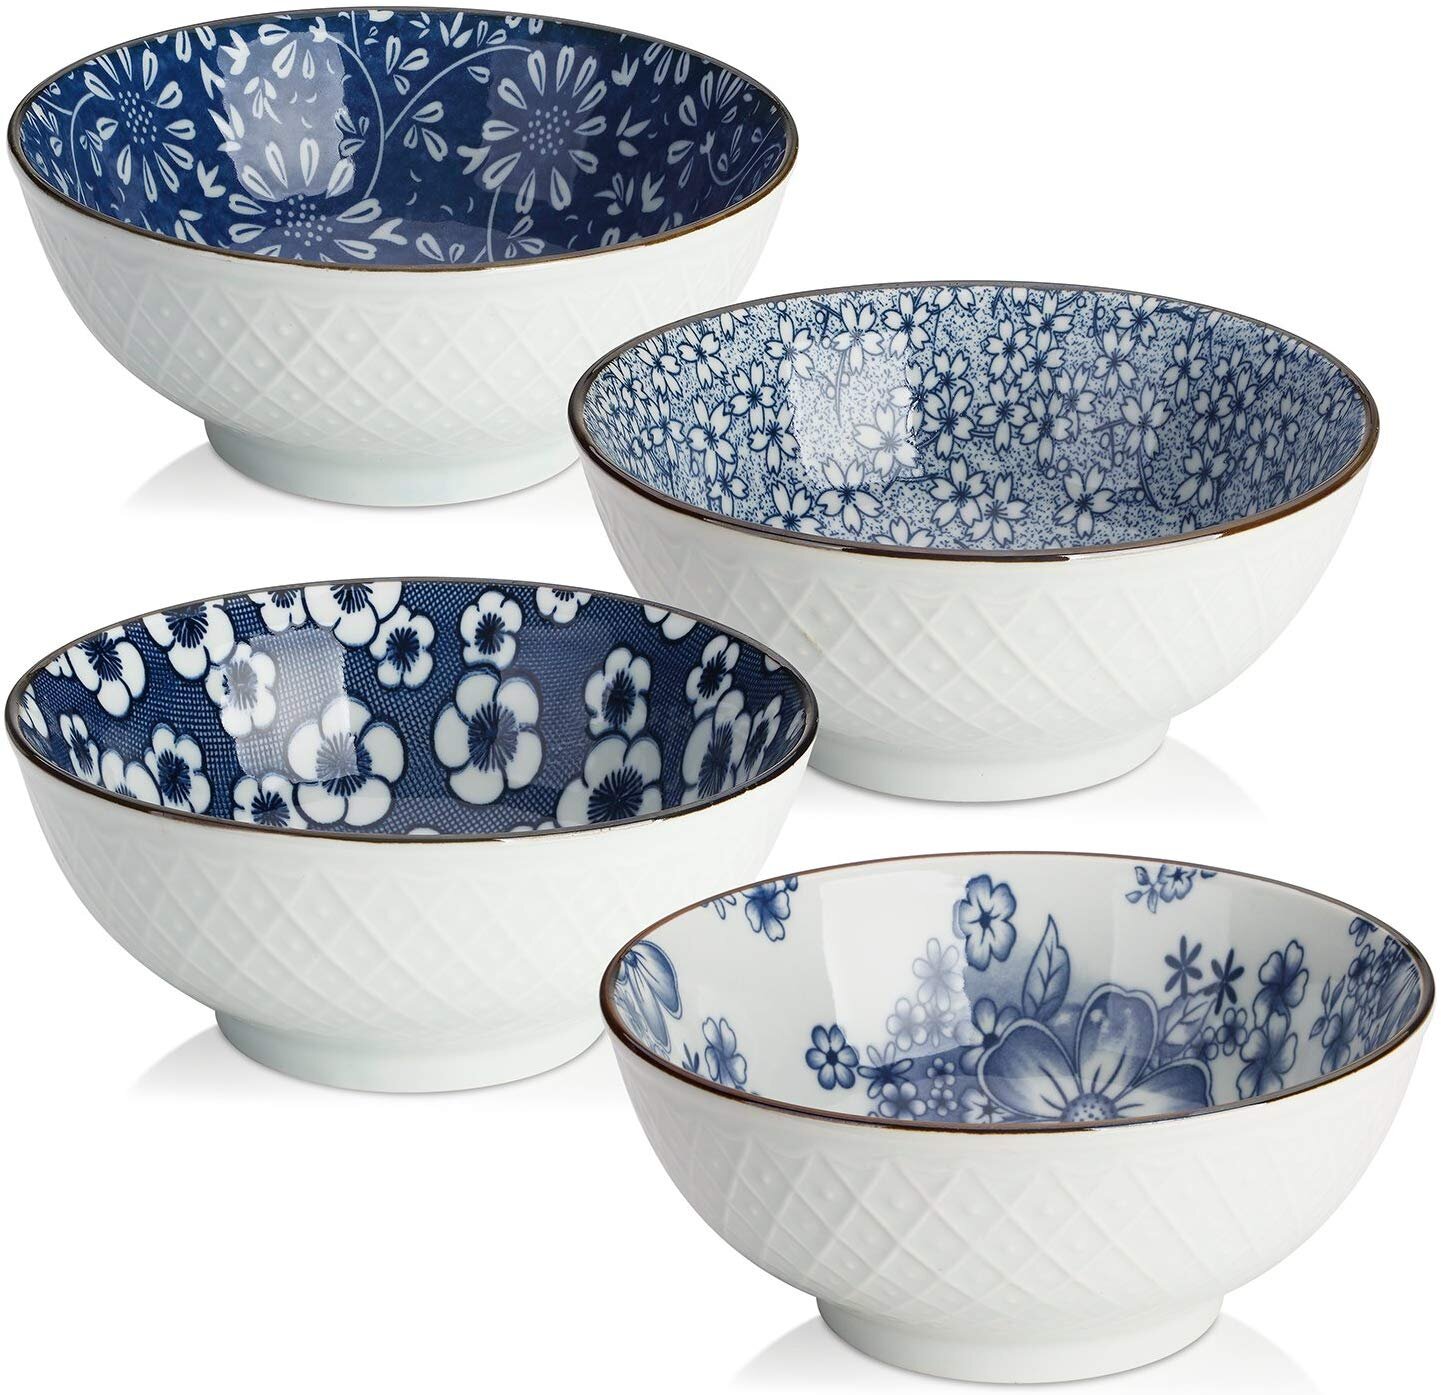  Blue and White Bowls